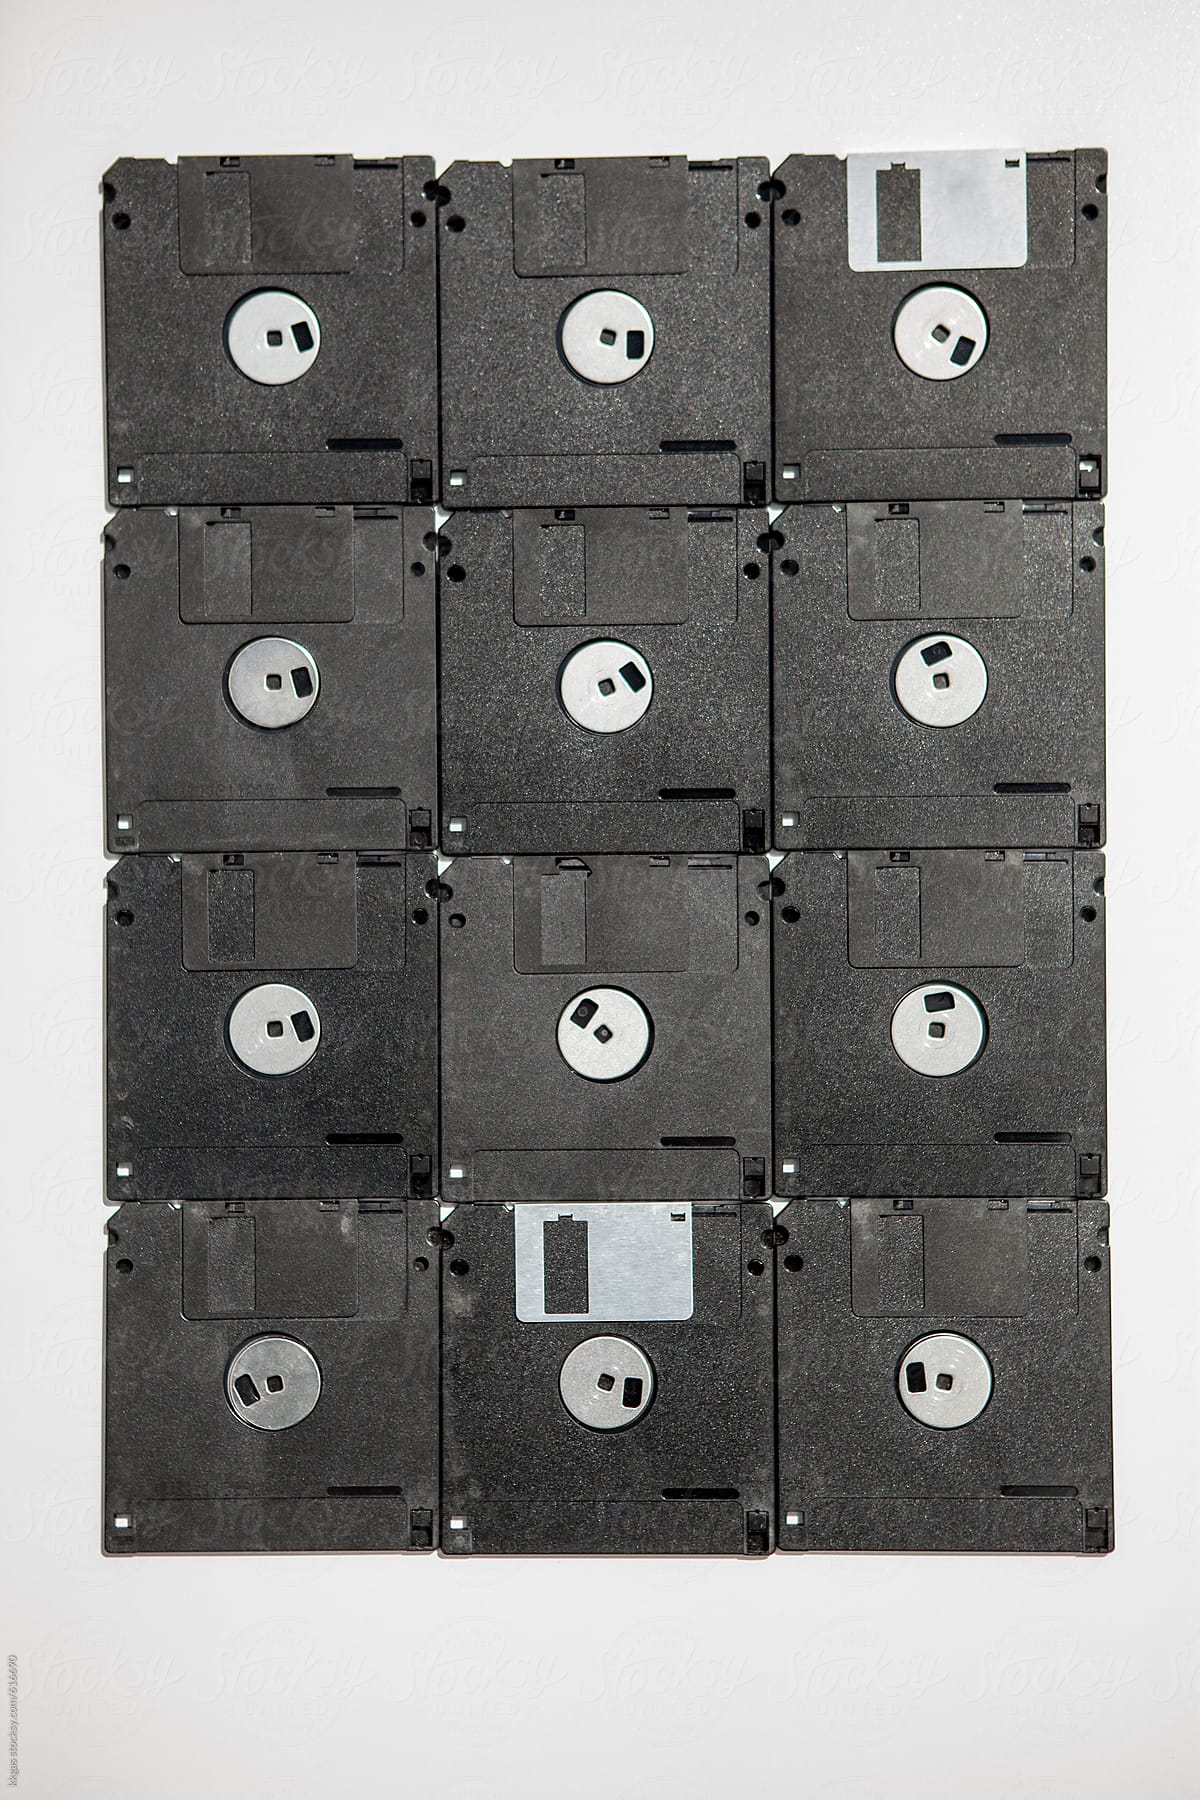 Twelve floppy disks laid out in a rectangle